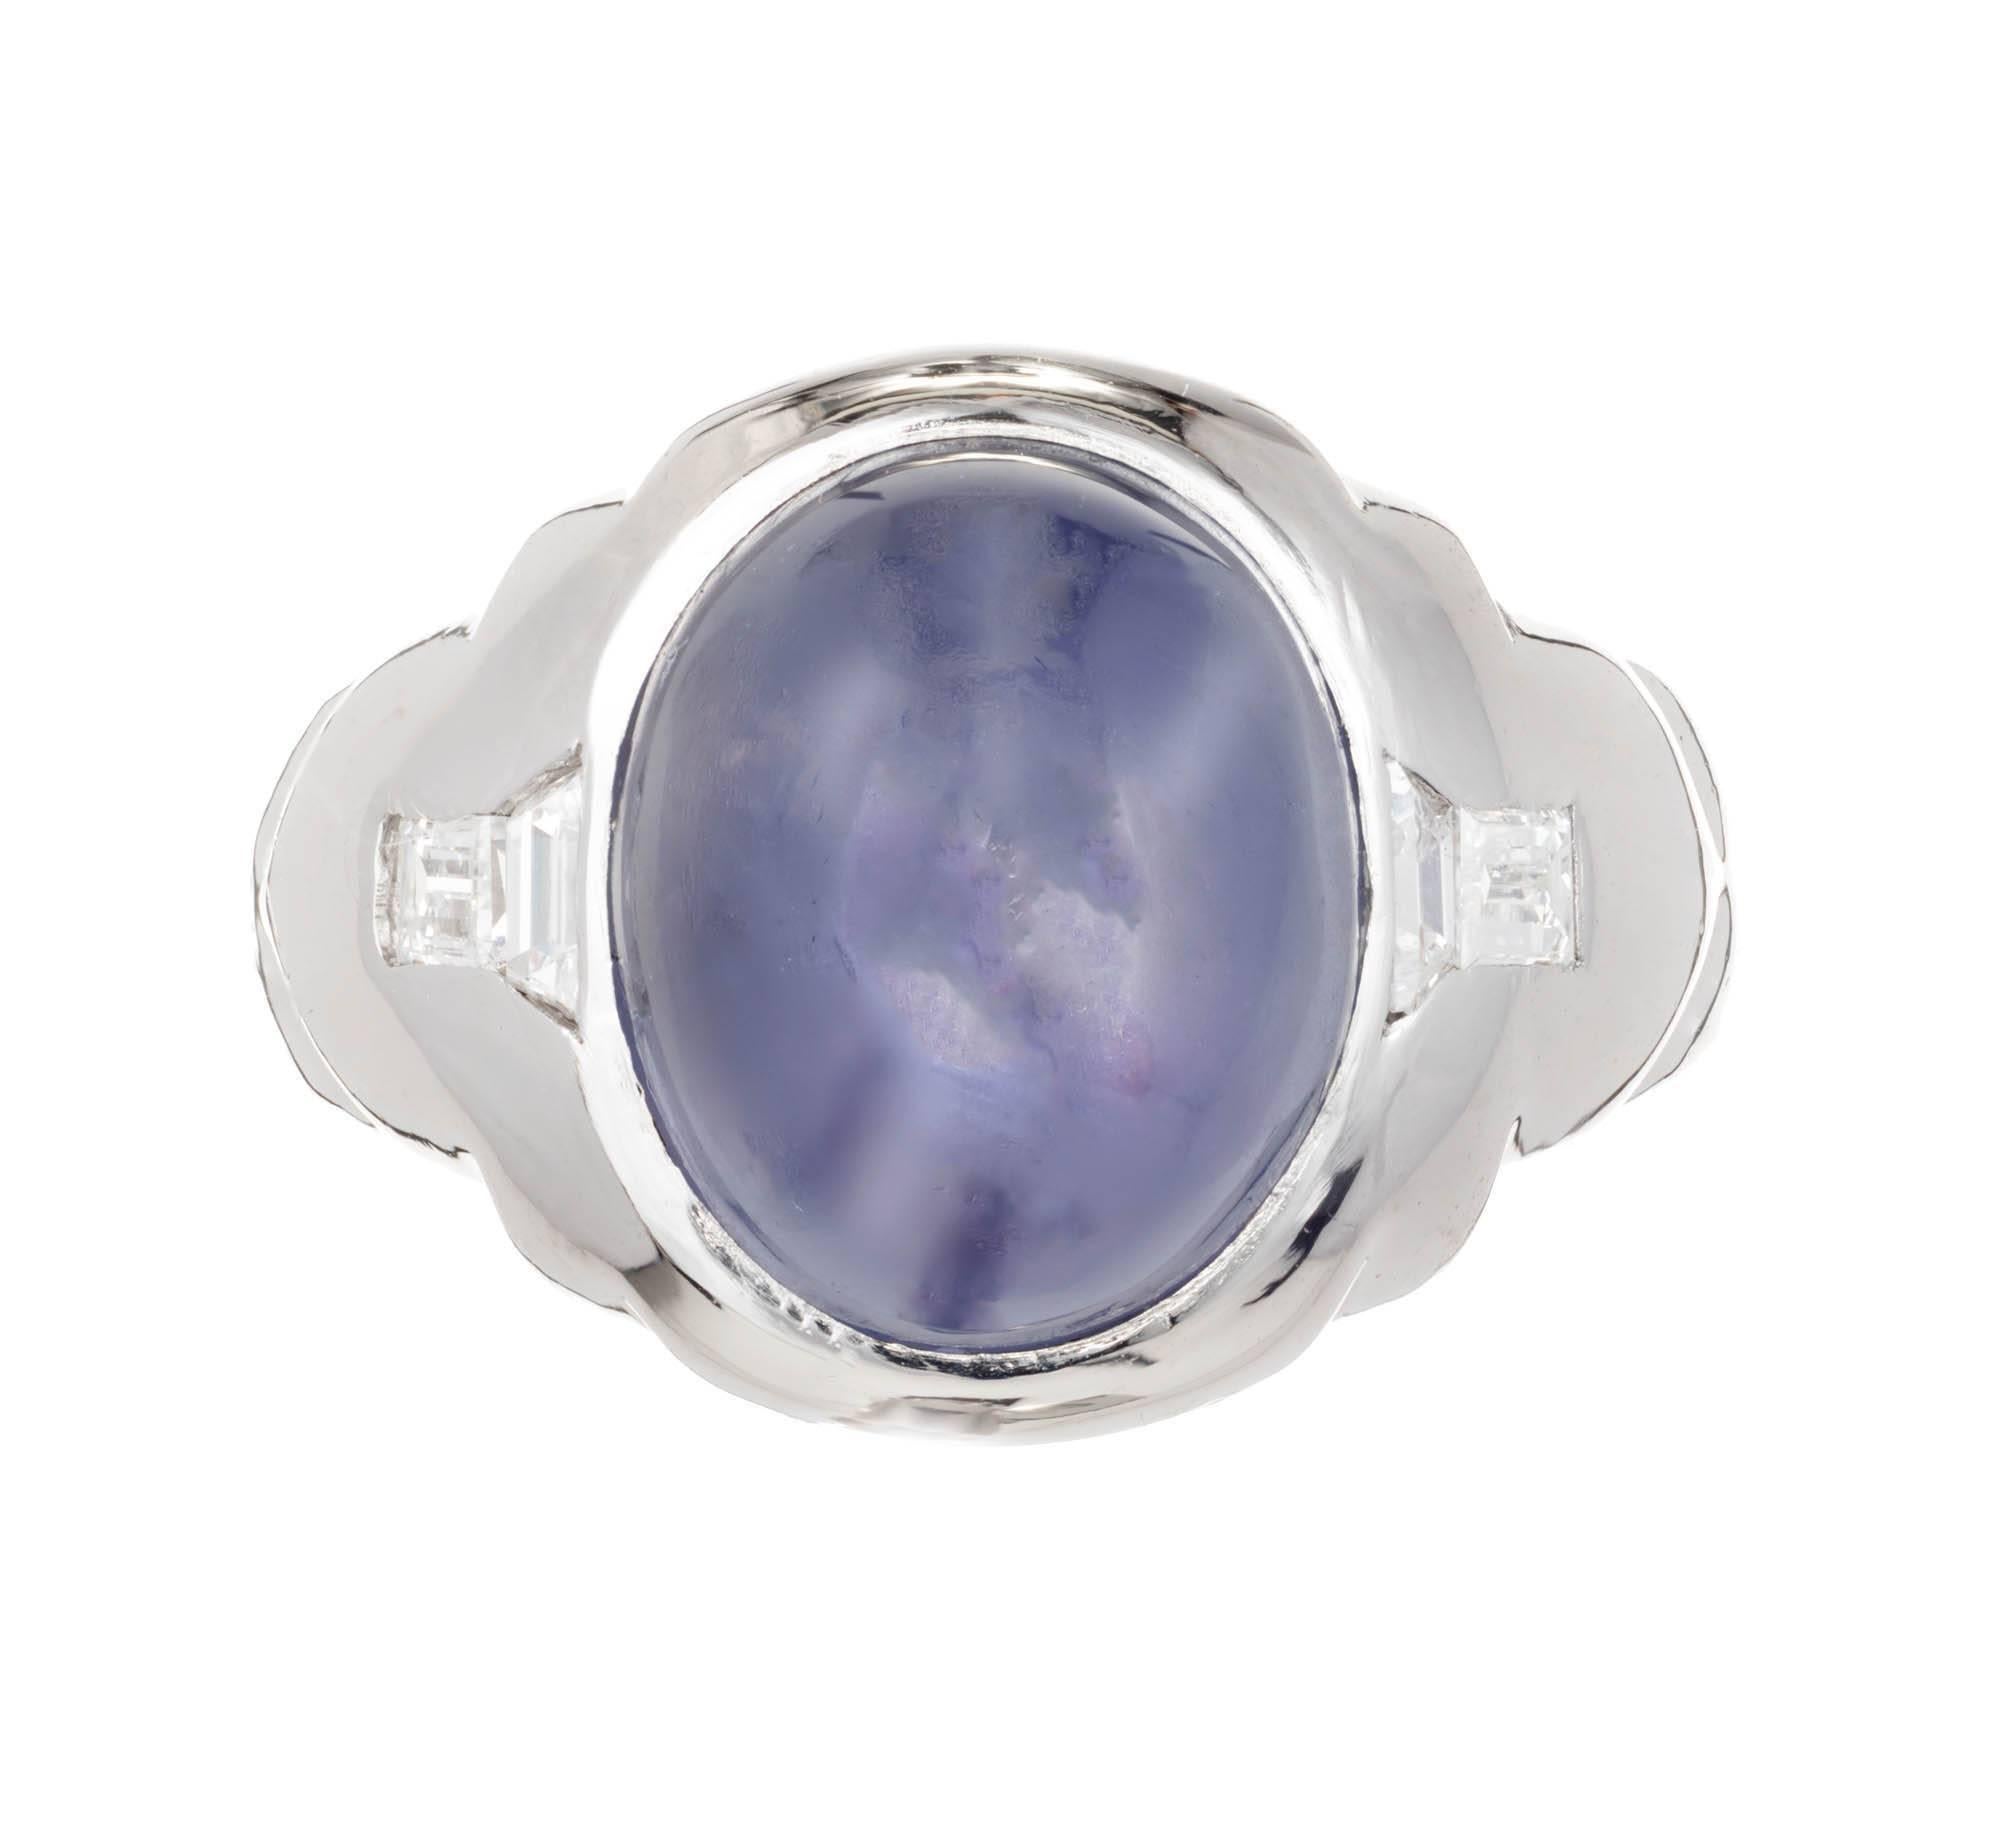 Art Deco 1920’s men’s violet blue star Sapphire diamond ring. Set in platinum with diamond accents. Excellent translucency and well-formed star. See GIA picture. Platinum ring. Translucent even from the side view. Although the star is difficult to